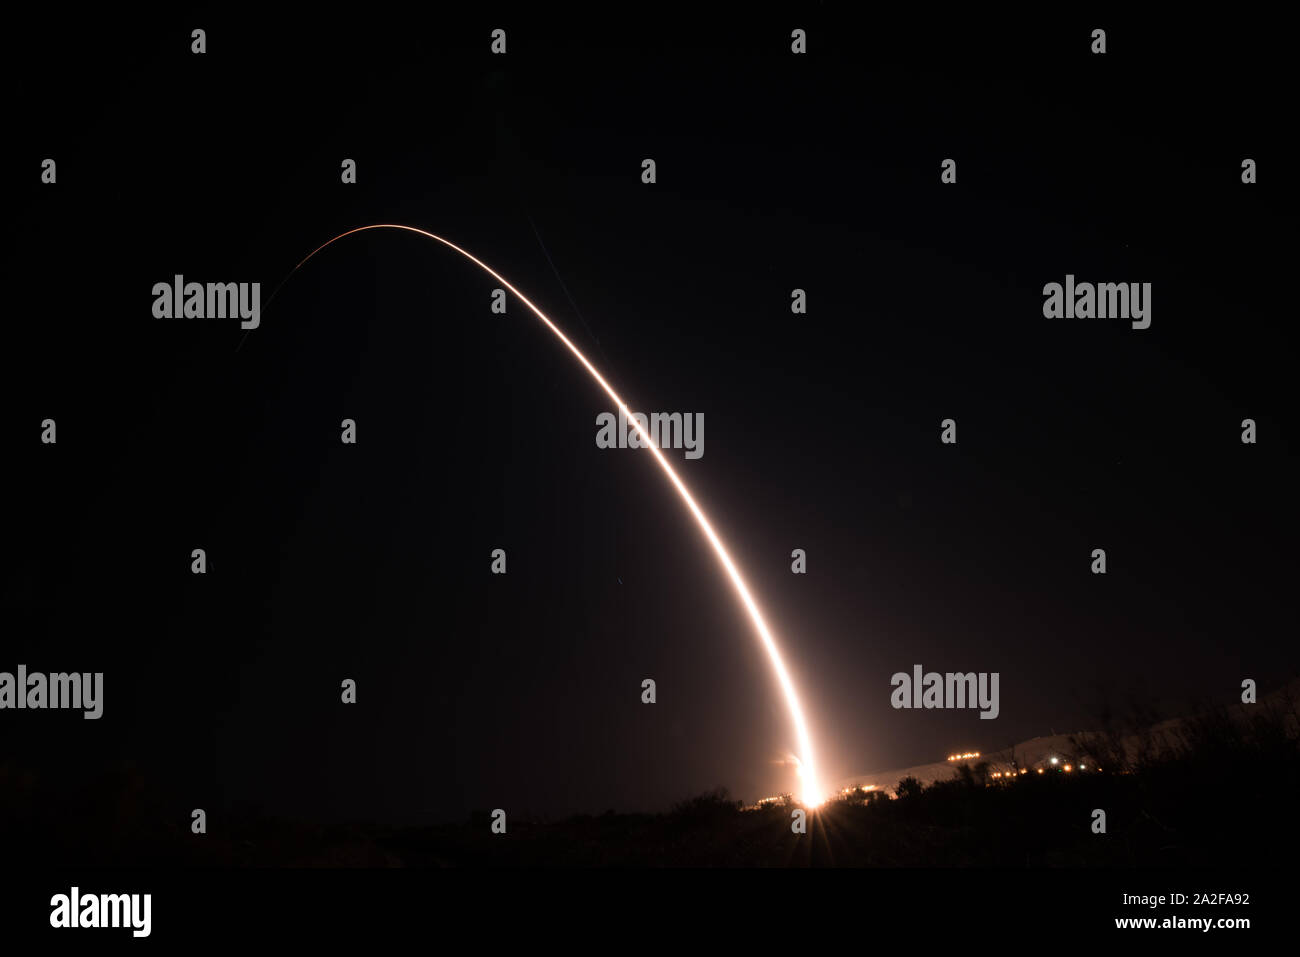 An unarmed Minuteman III intercontinental ballistic missile launches during an operational test at 1:13 a.m. Pacific Time Oct. 2, 2019, at Vandenberg Air Force Base, Calif. (U.S. Air Force photo by Michael Peterson) Stock Photo